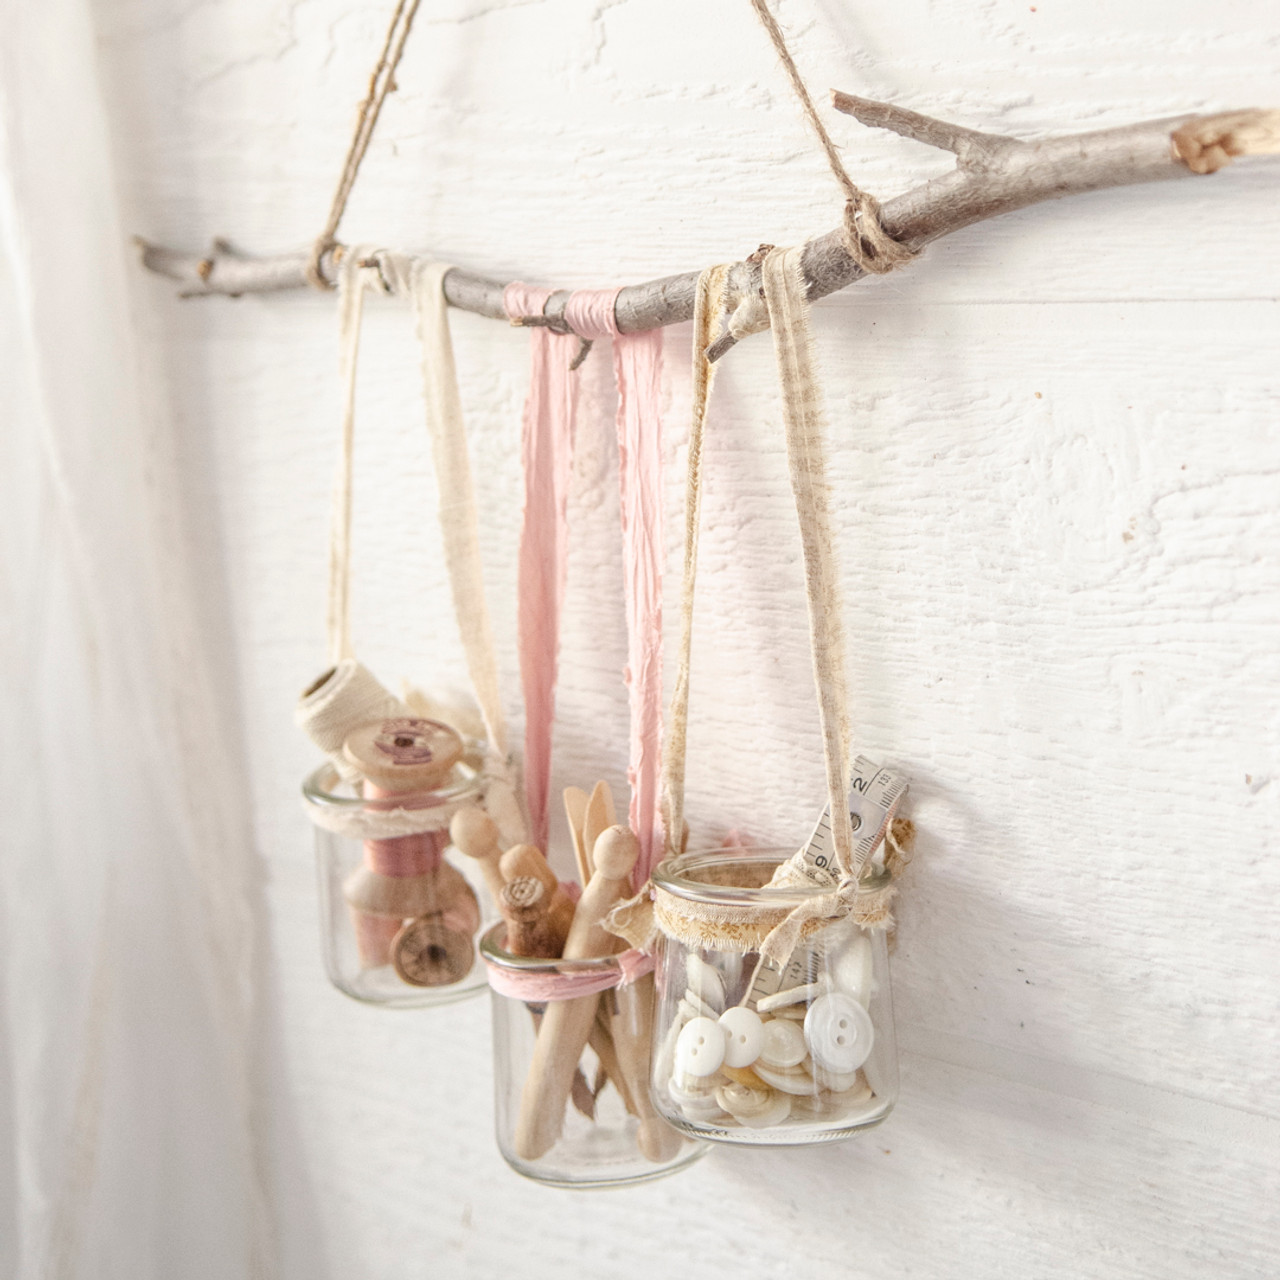 Recycled Yogurt Containers Hanging Wall Decor